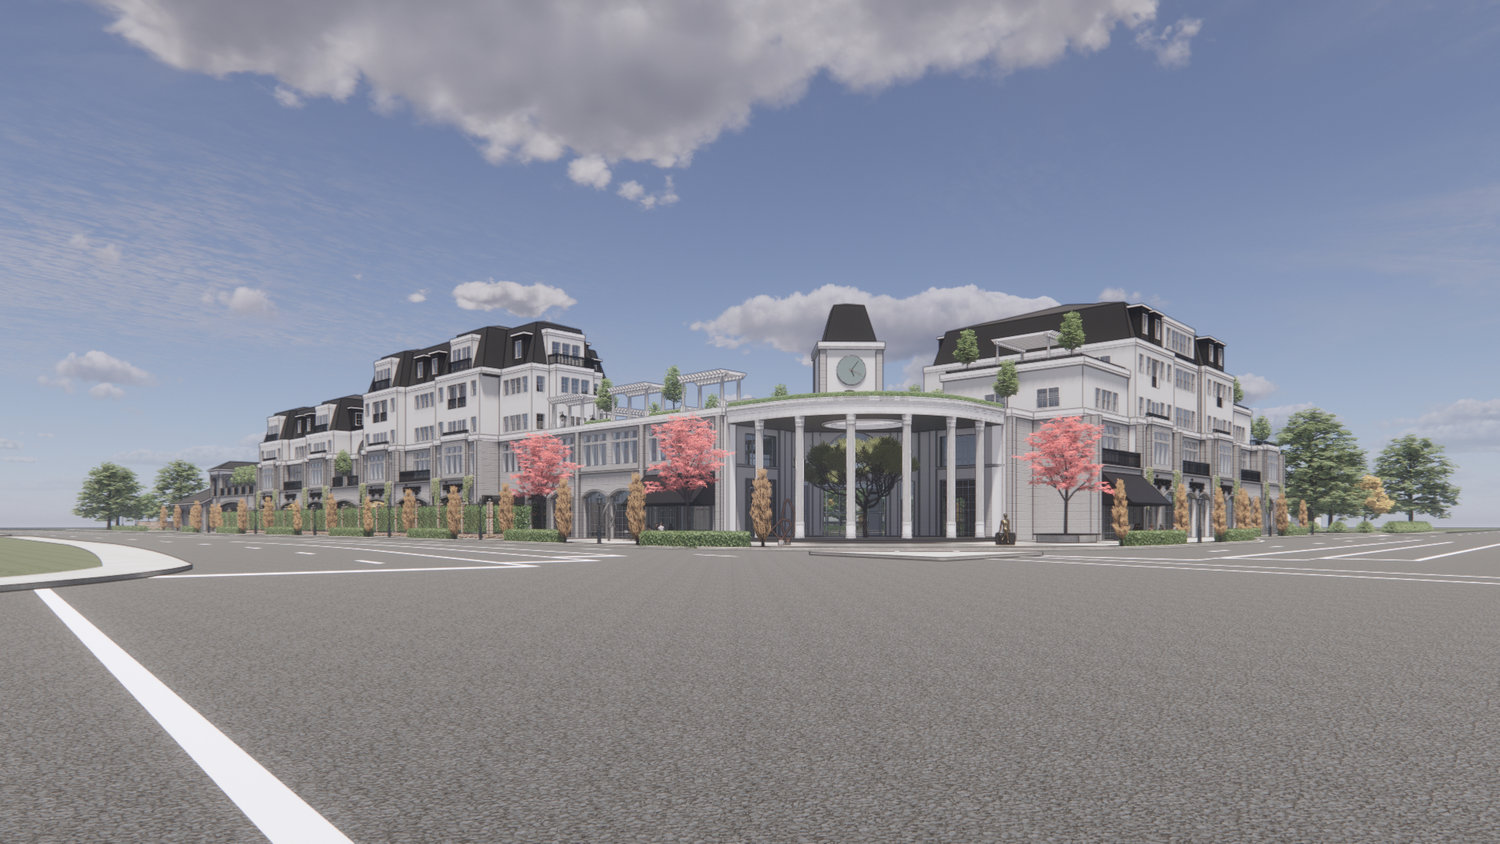 The Heights development would stretch around the corner at National Avenue and Sunshine Street.